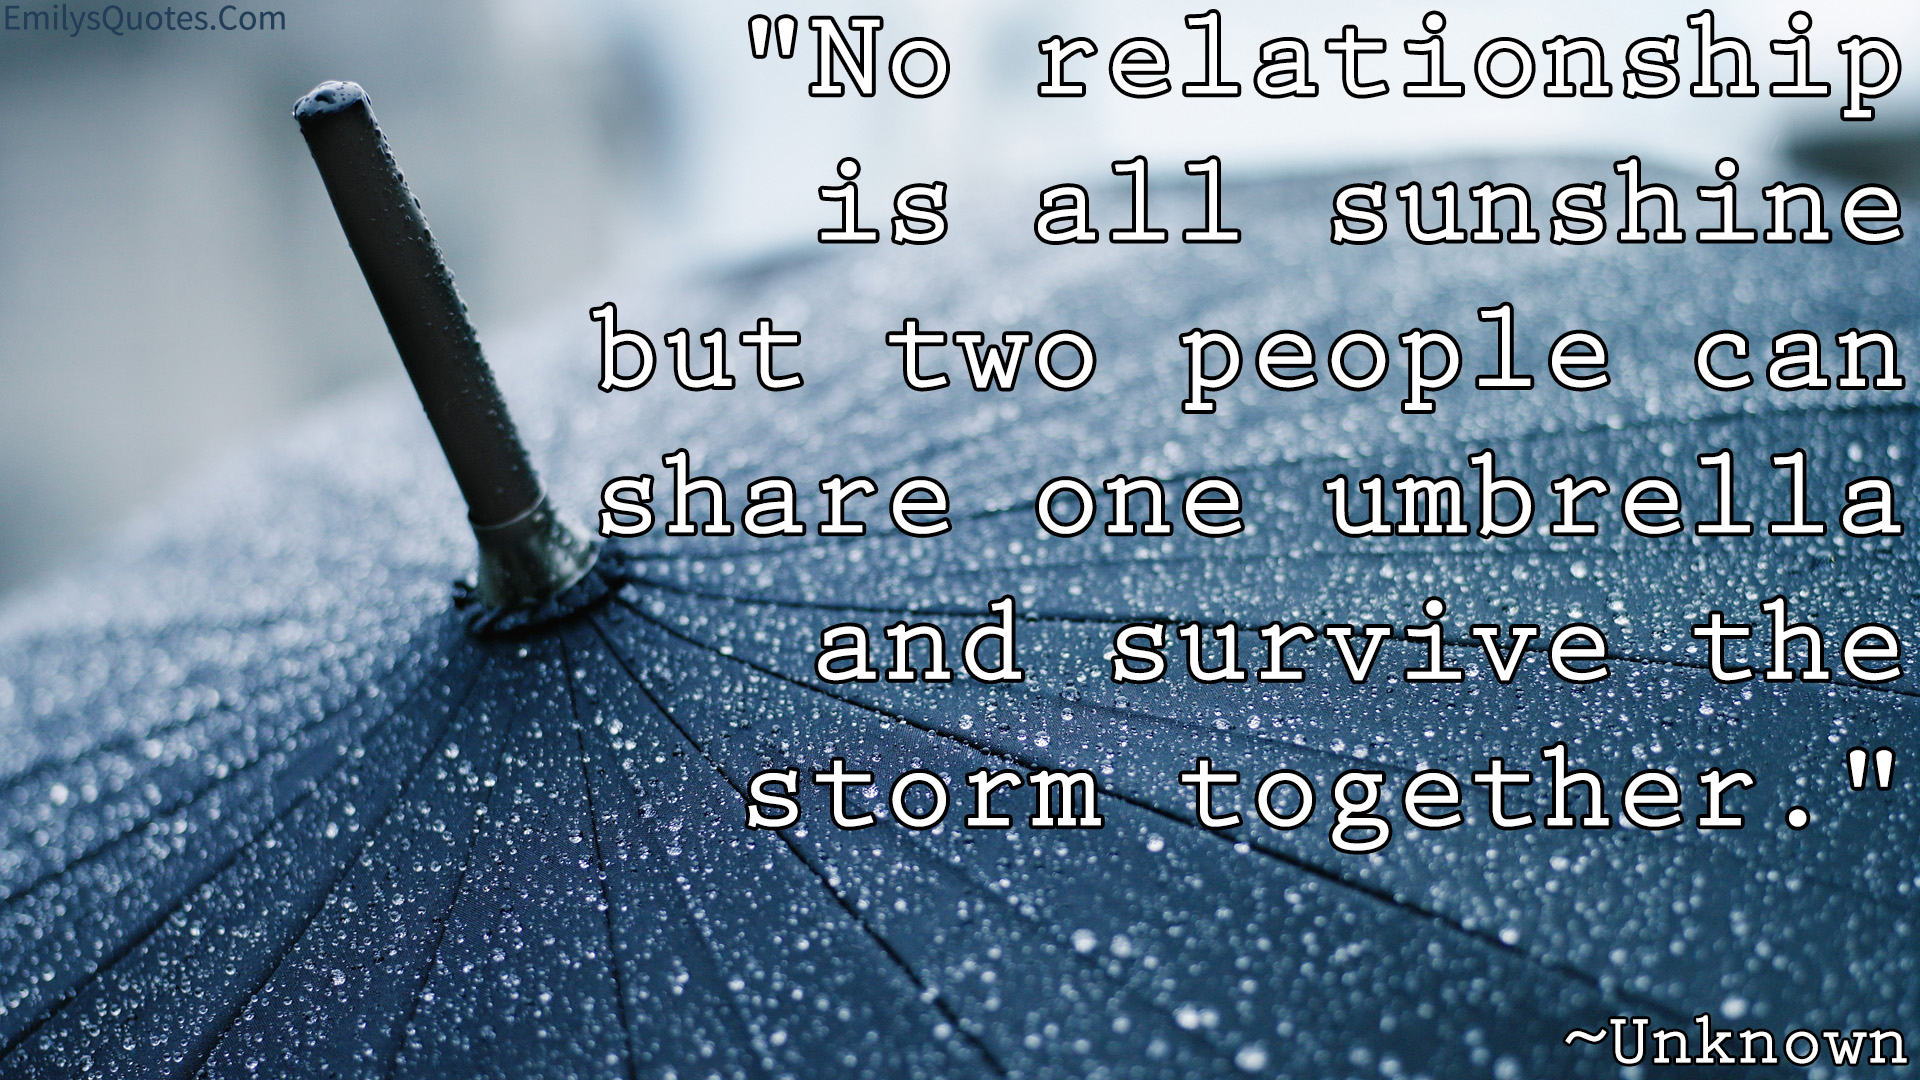 No relationship is all sunshine but two people can share one umbrella and survive the storm together